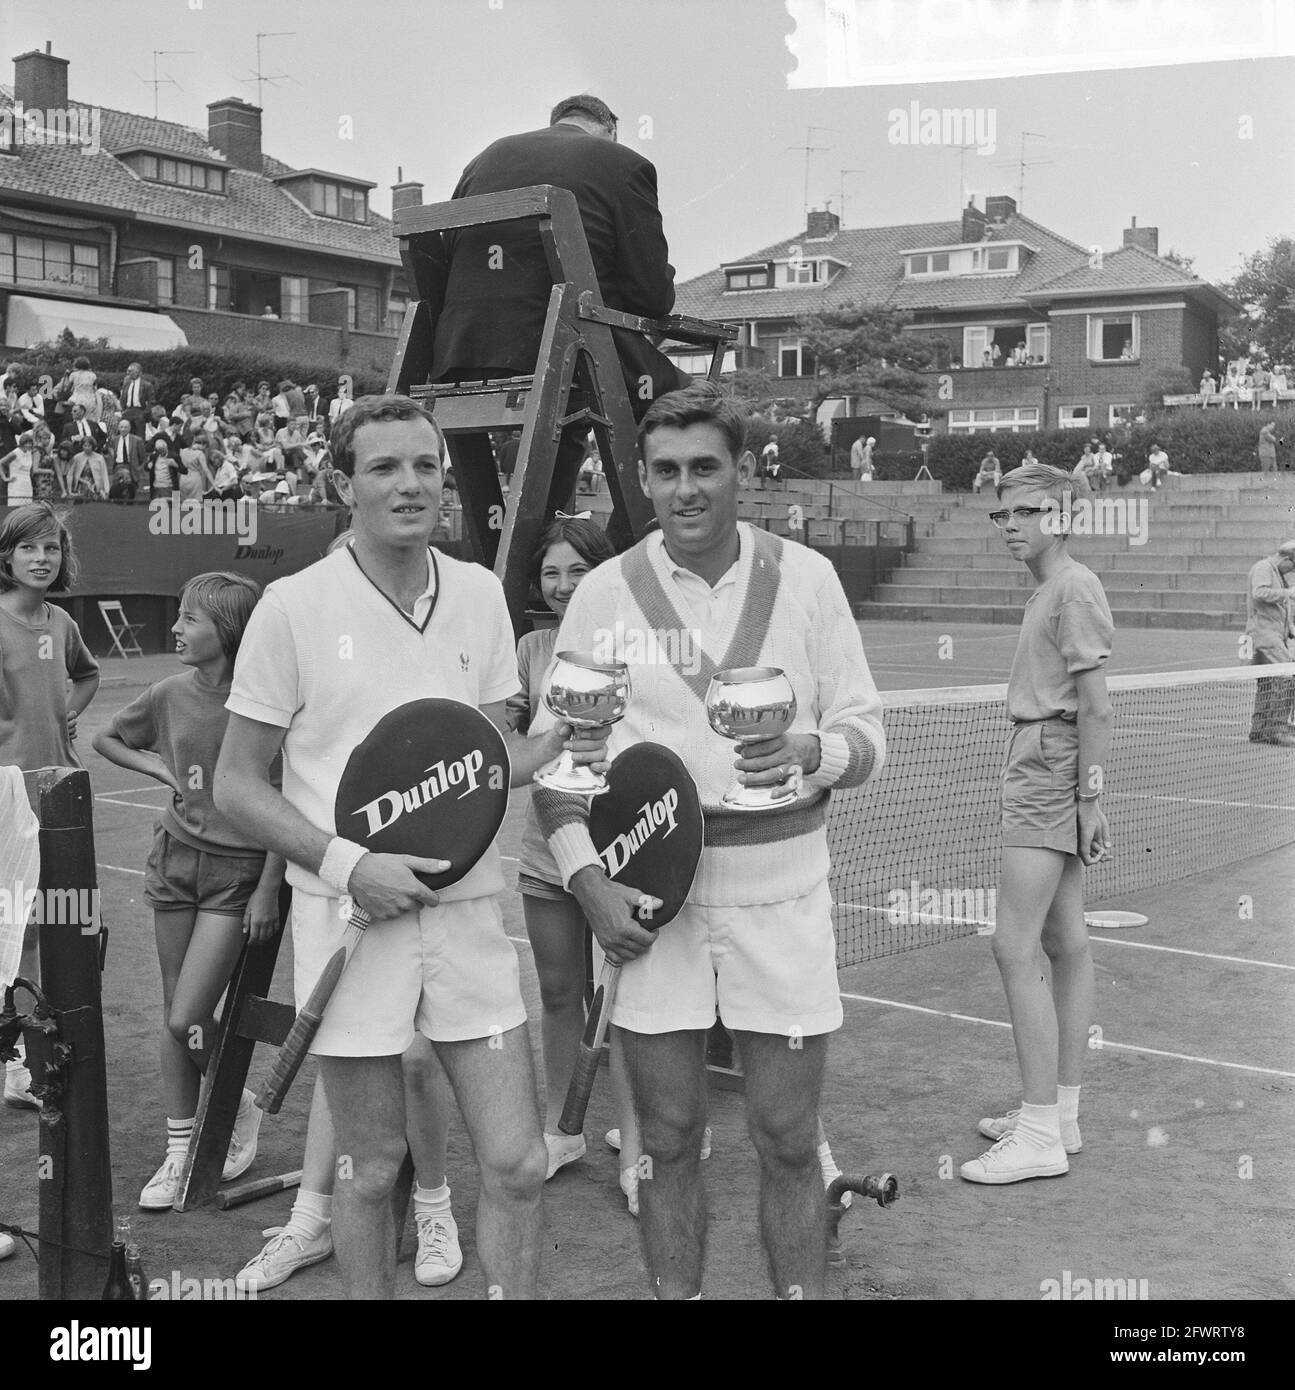 Dutch tennis championships, winners men's doubles Okker and Eysden (r), August 14, 1965, Winners, championships, tennis, The Netherlands, 20th century press agency photo, news to remember, documentary, historic photography 1945-1990, visual stories, human history of the Twentieth Century, capturing moments in time Stock Photo